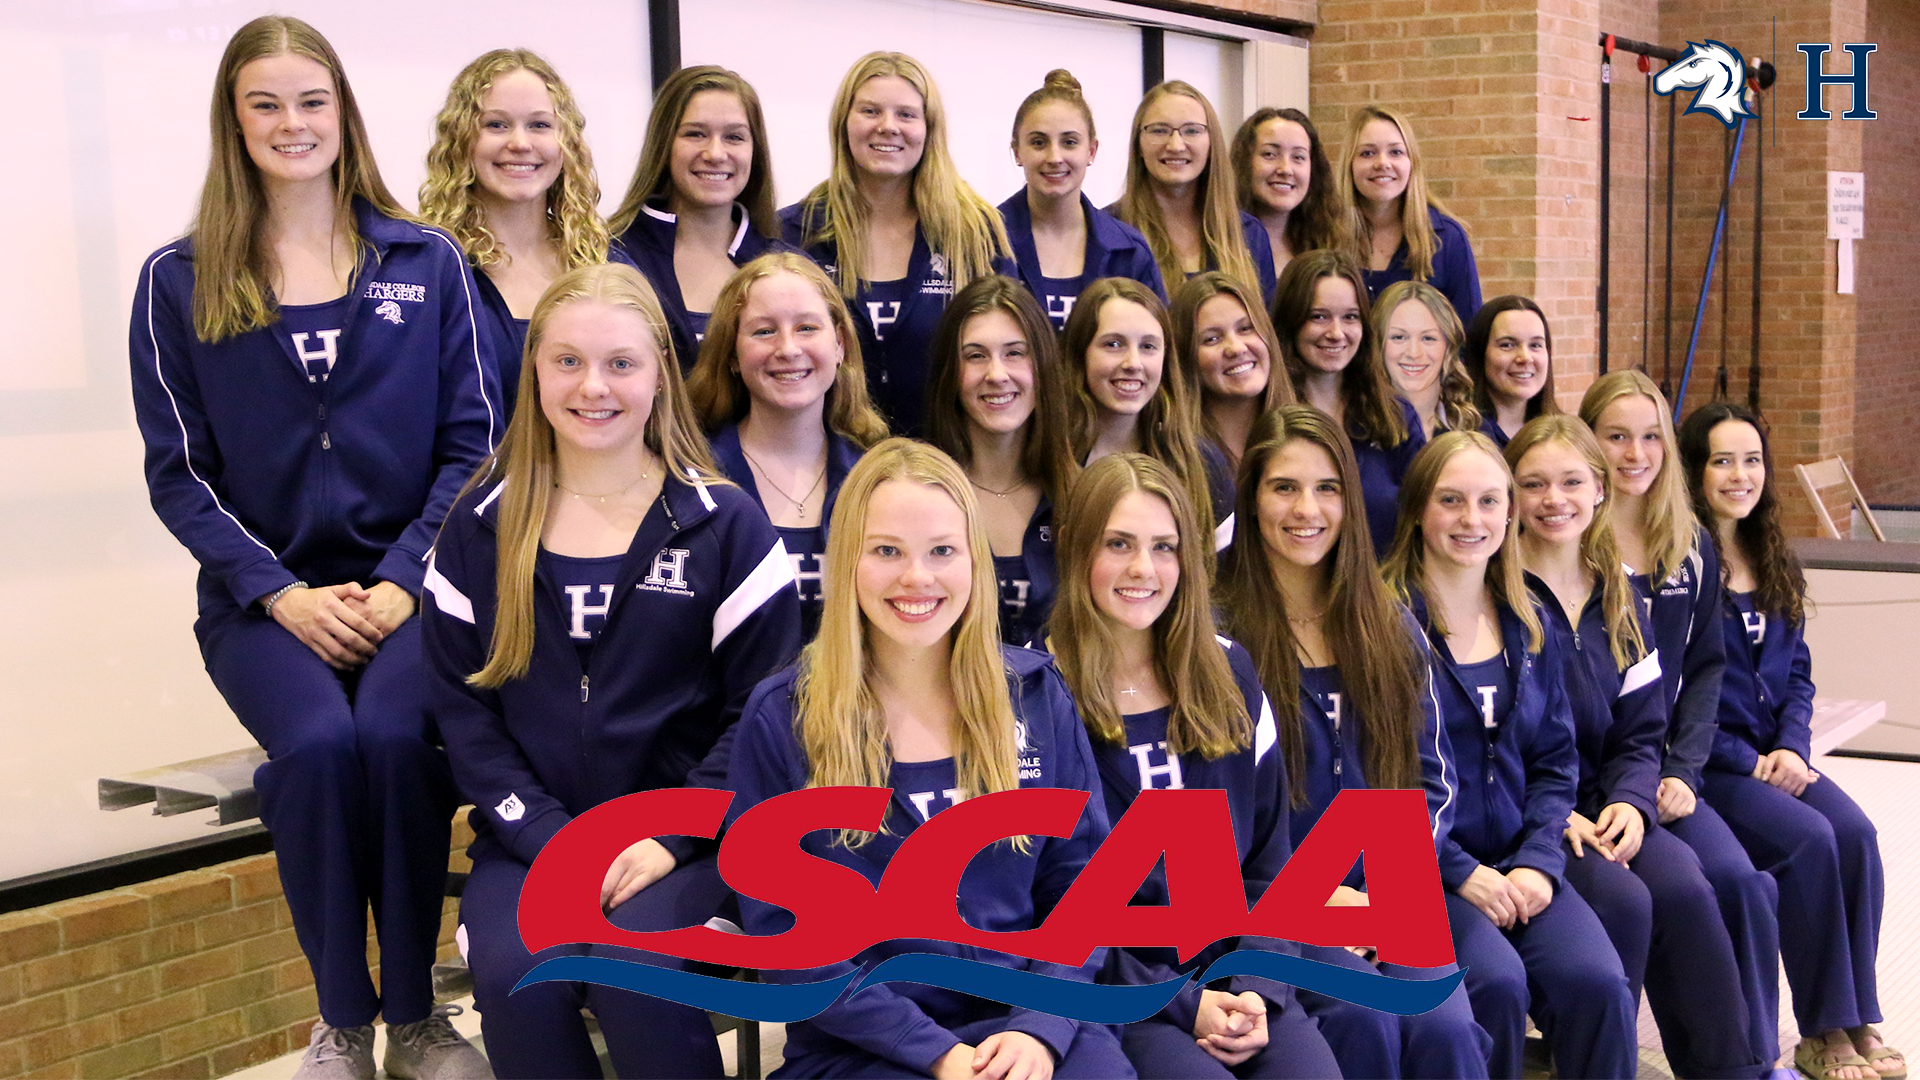 Charger women's swim team named Scholar All-Americans by CSCAA for 15th straight season